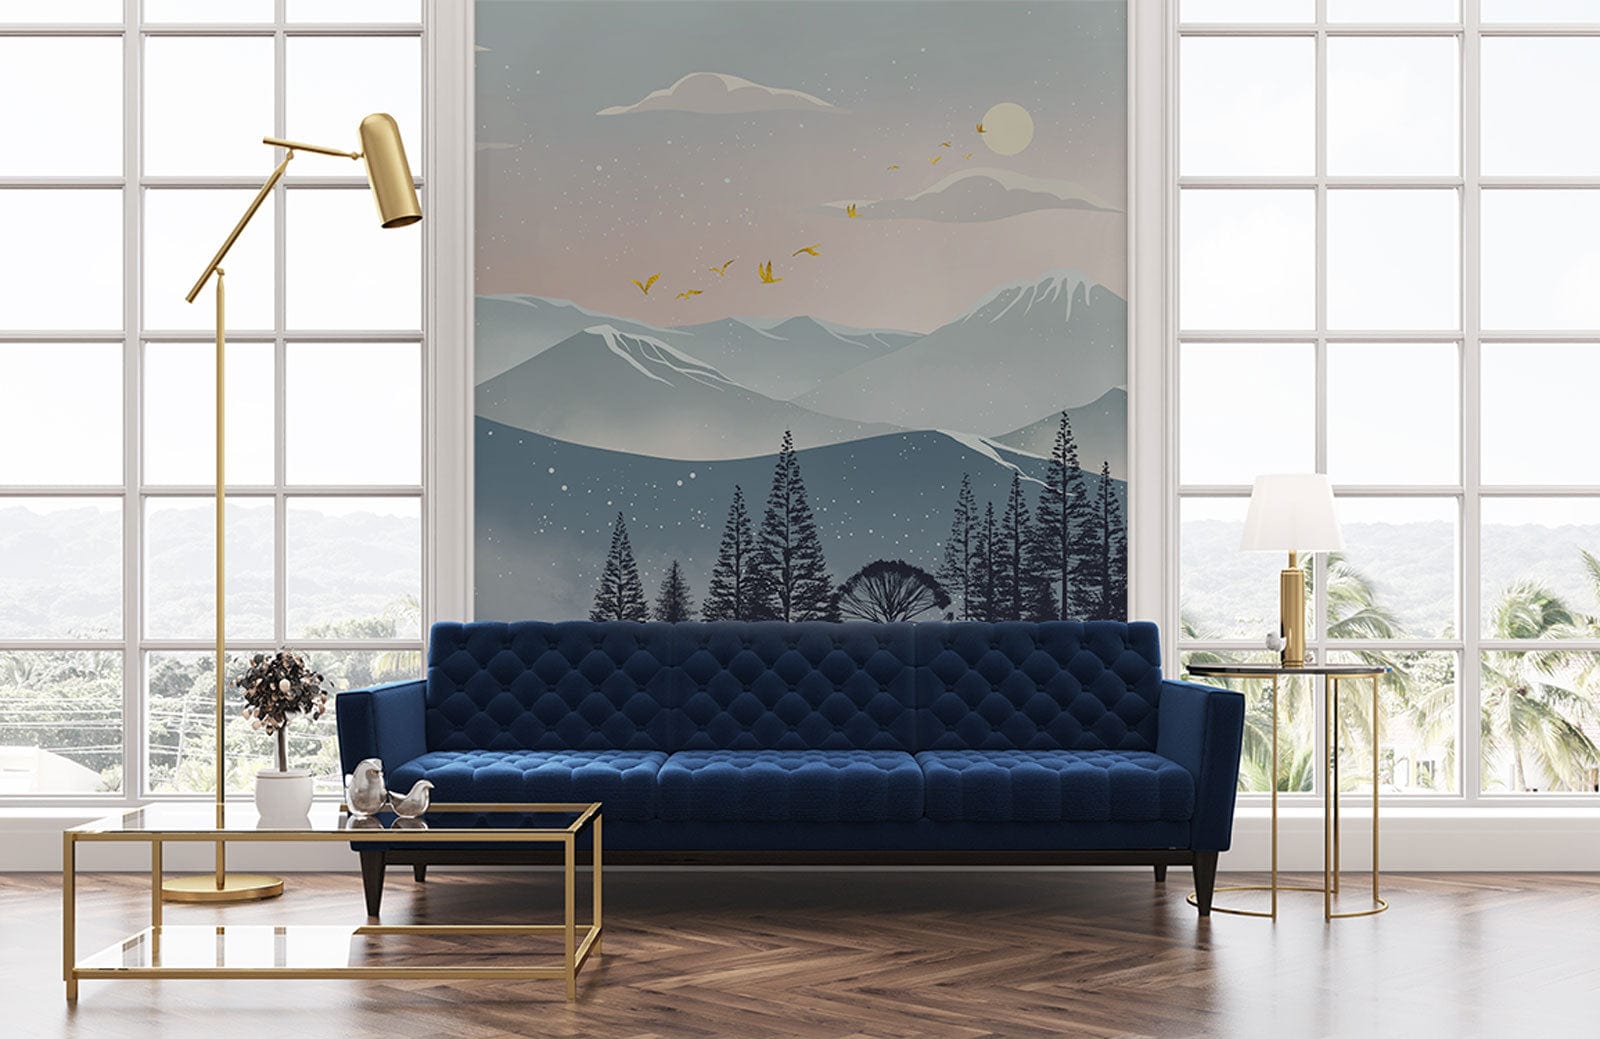 Decoration for the Living Room Featuring an Ombre Mountain Scenery Wallpaper Mural